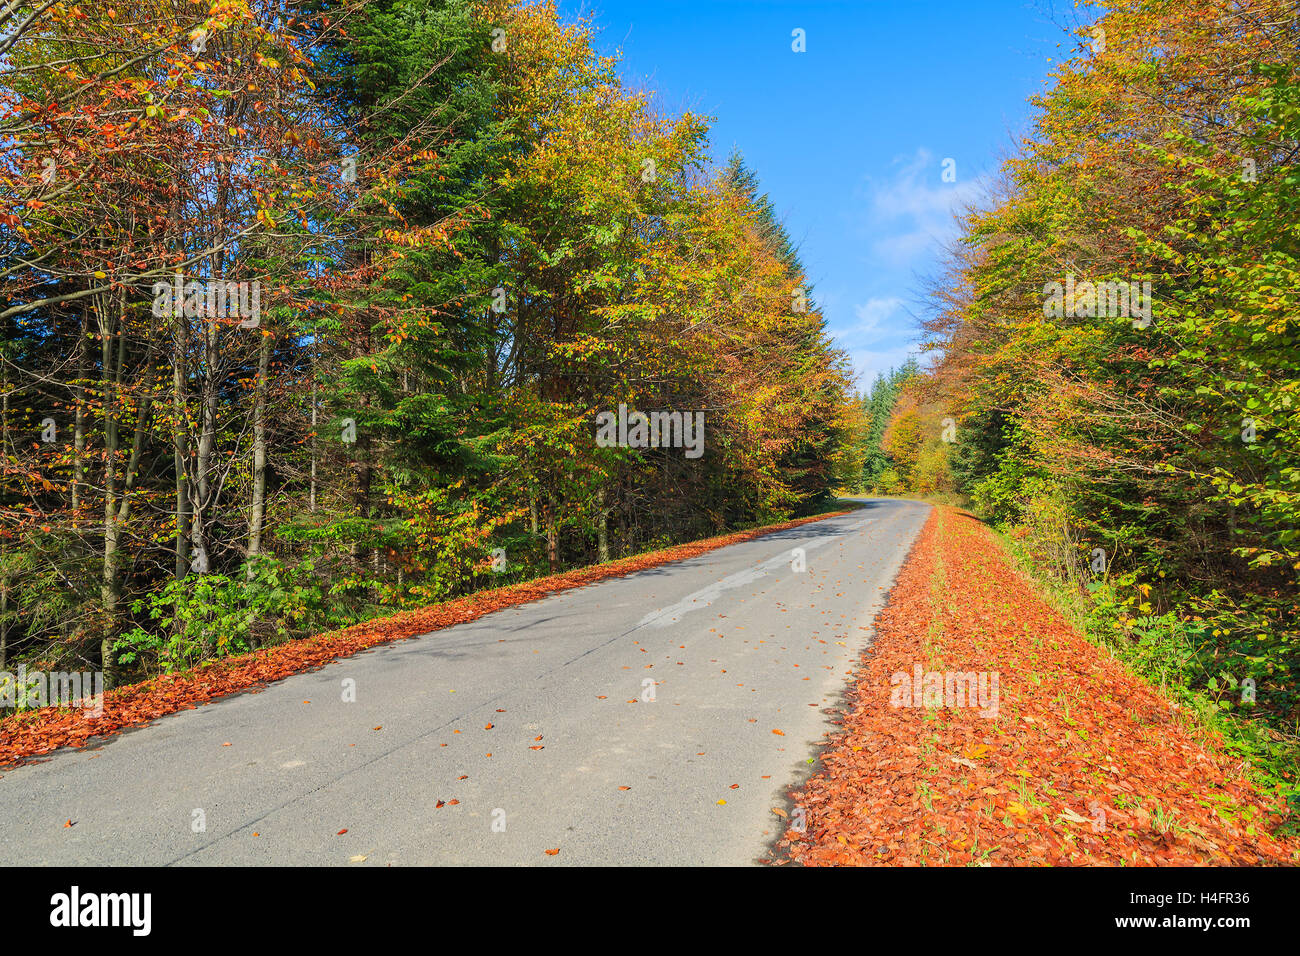 Rural road in forest on sunny autumn day, Beskid Niski Mountains, Poland Stock Photo